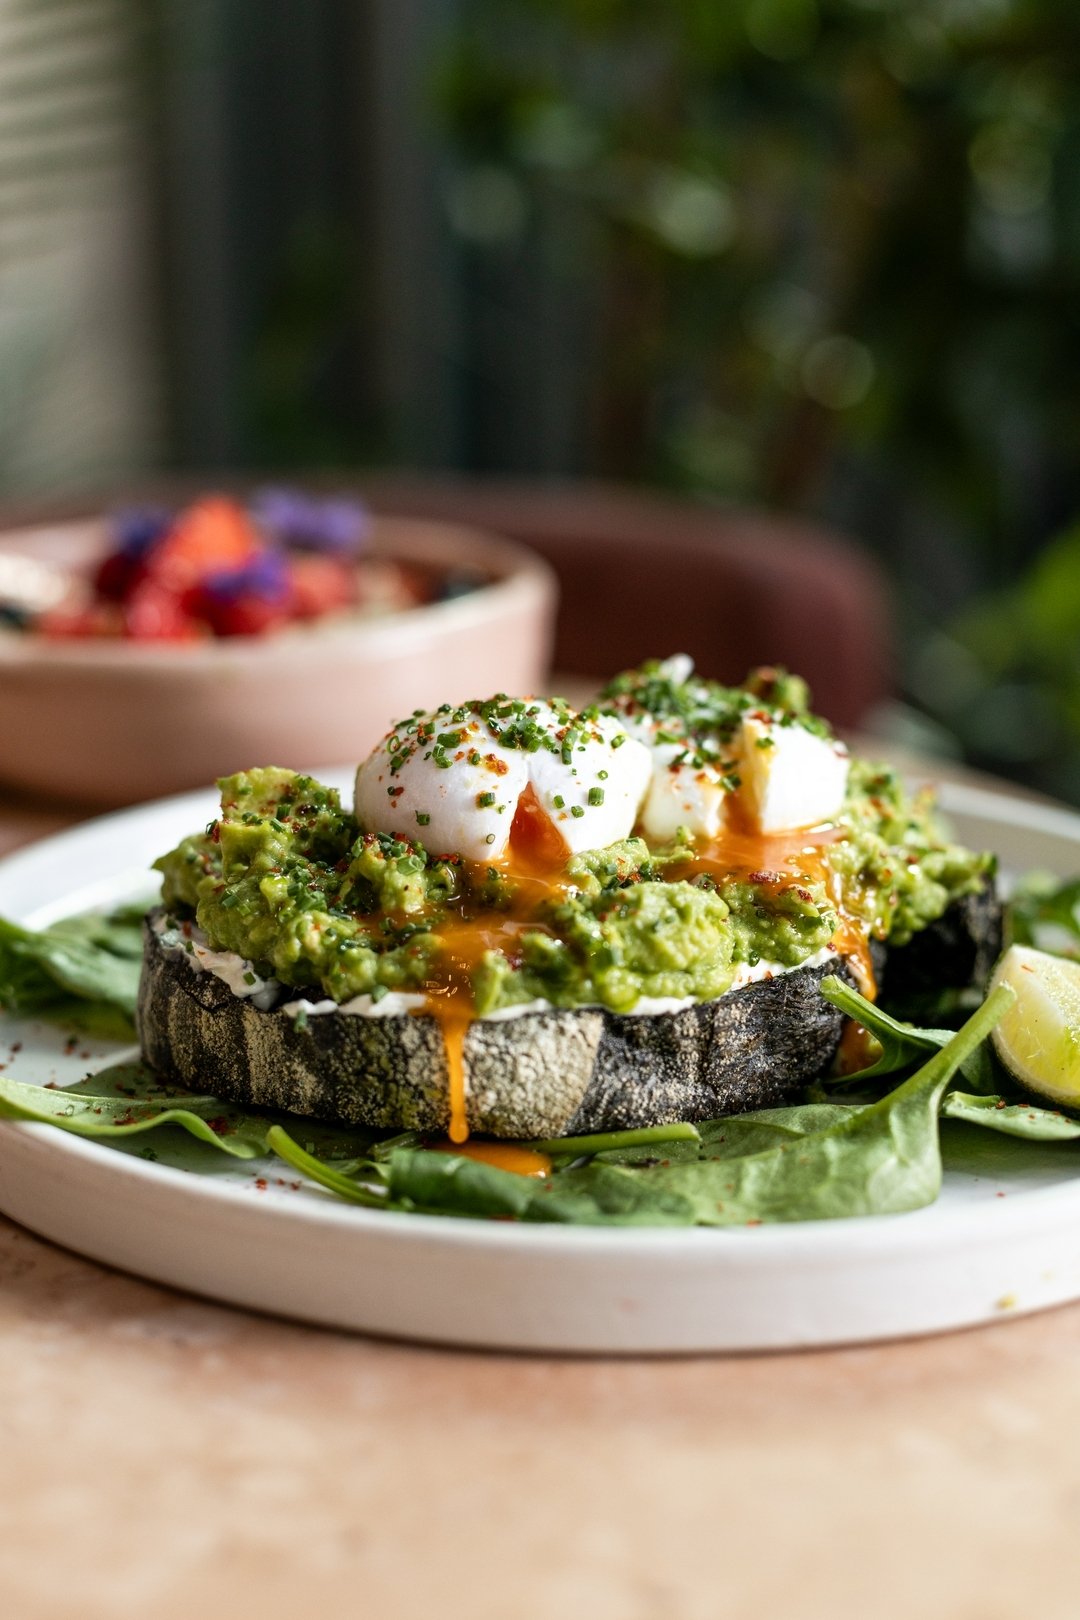 Fueling up this Saturday morning with a brunch dream team: creamy avocado, perfectly poached eggs and toasted goodness. 🤩🥑☀️​​​​​​​​

​​​​​​We know what we will be ordering this weekend!🙌🏻
.
.
.
#bottomlessbrunch #brunch #brunchideas #londonbrunc